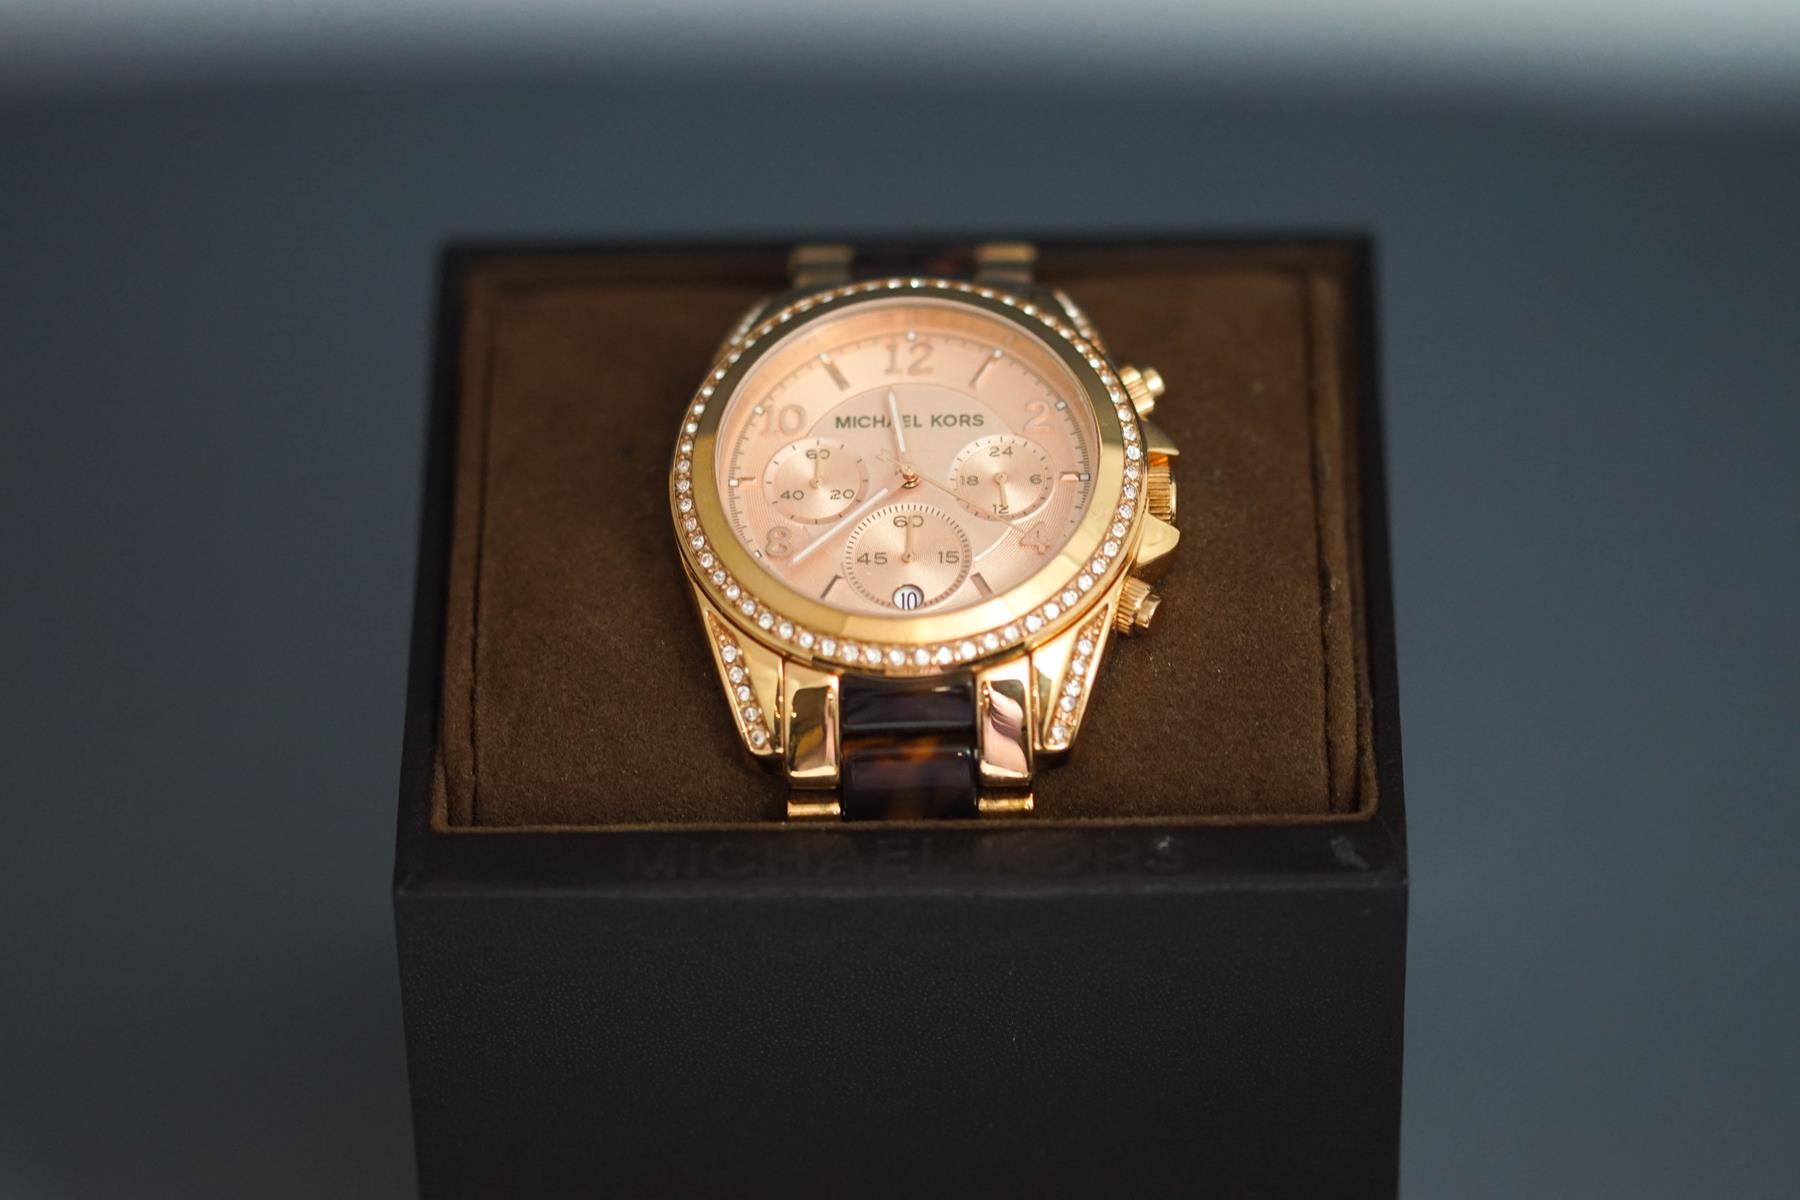 Michael Kors, a plated and tortoiseshell effect bracelet chronograph wristwatch, - Image 5 of 5